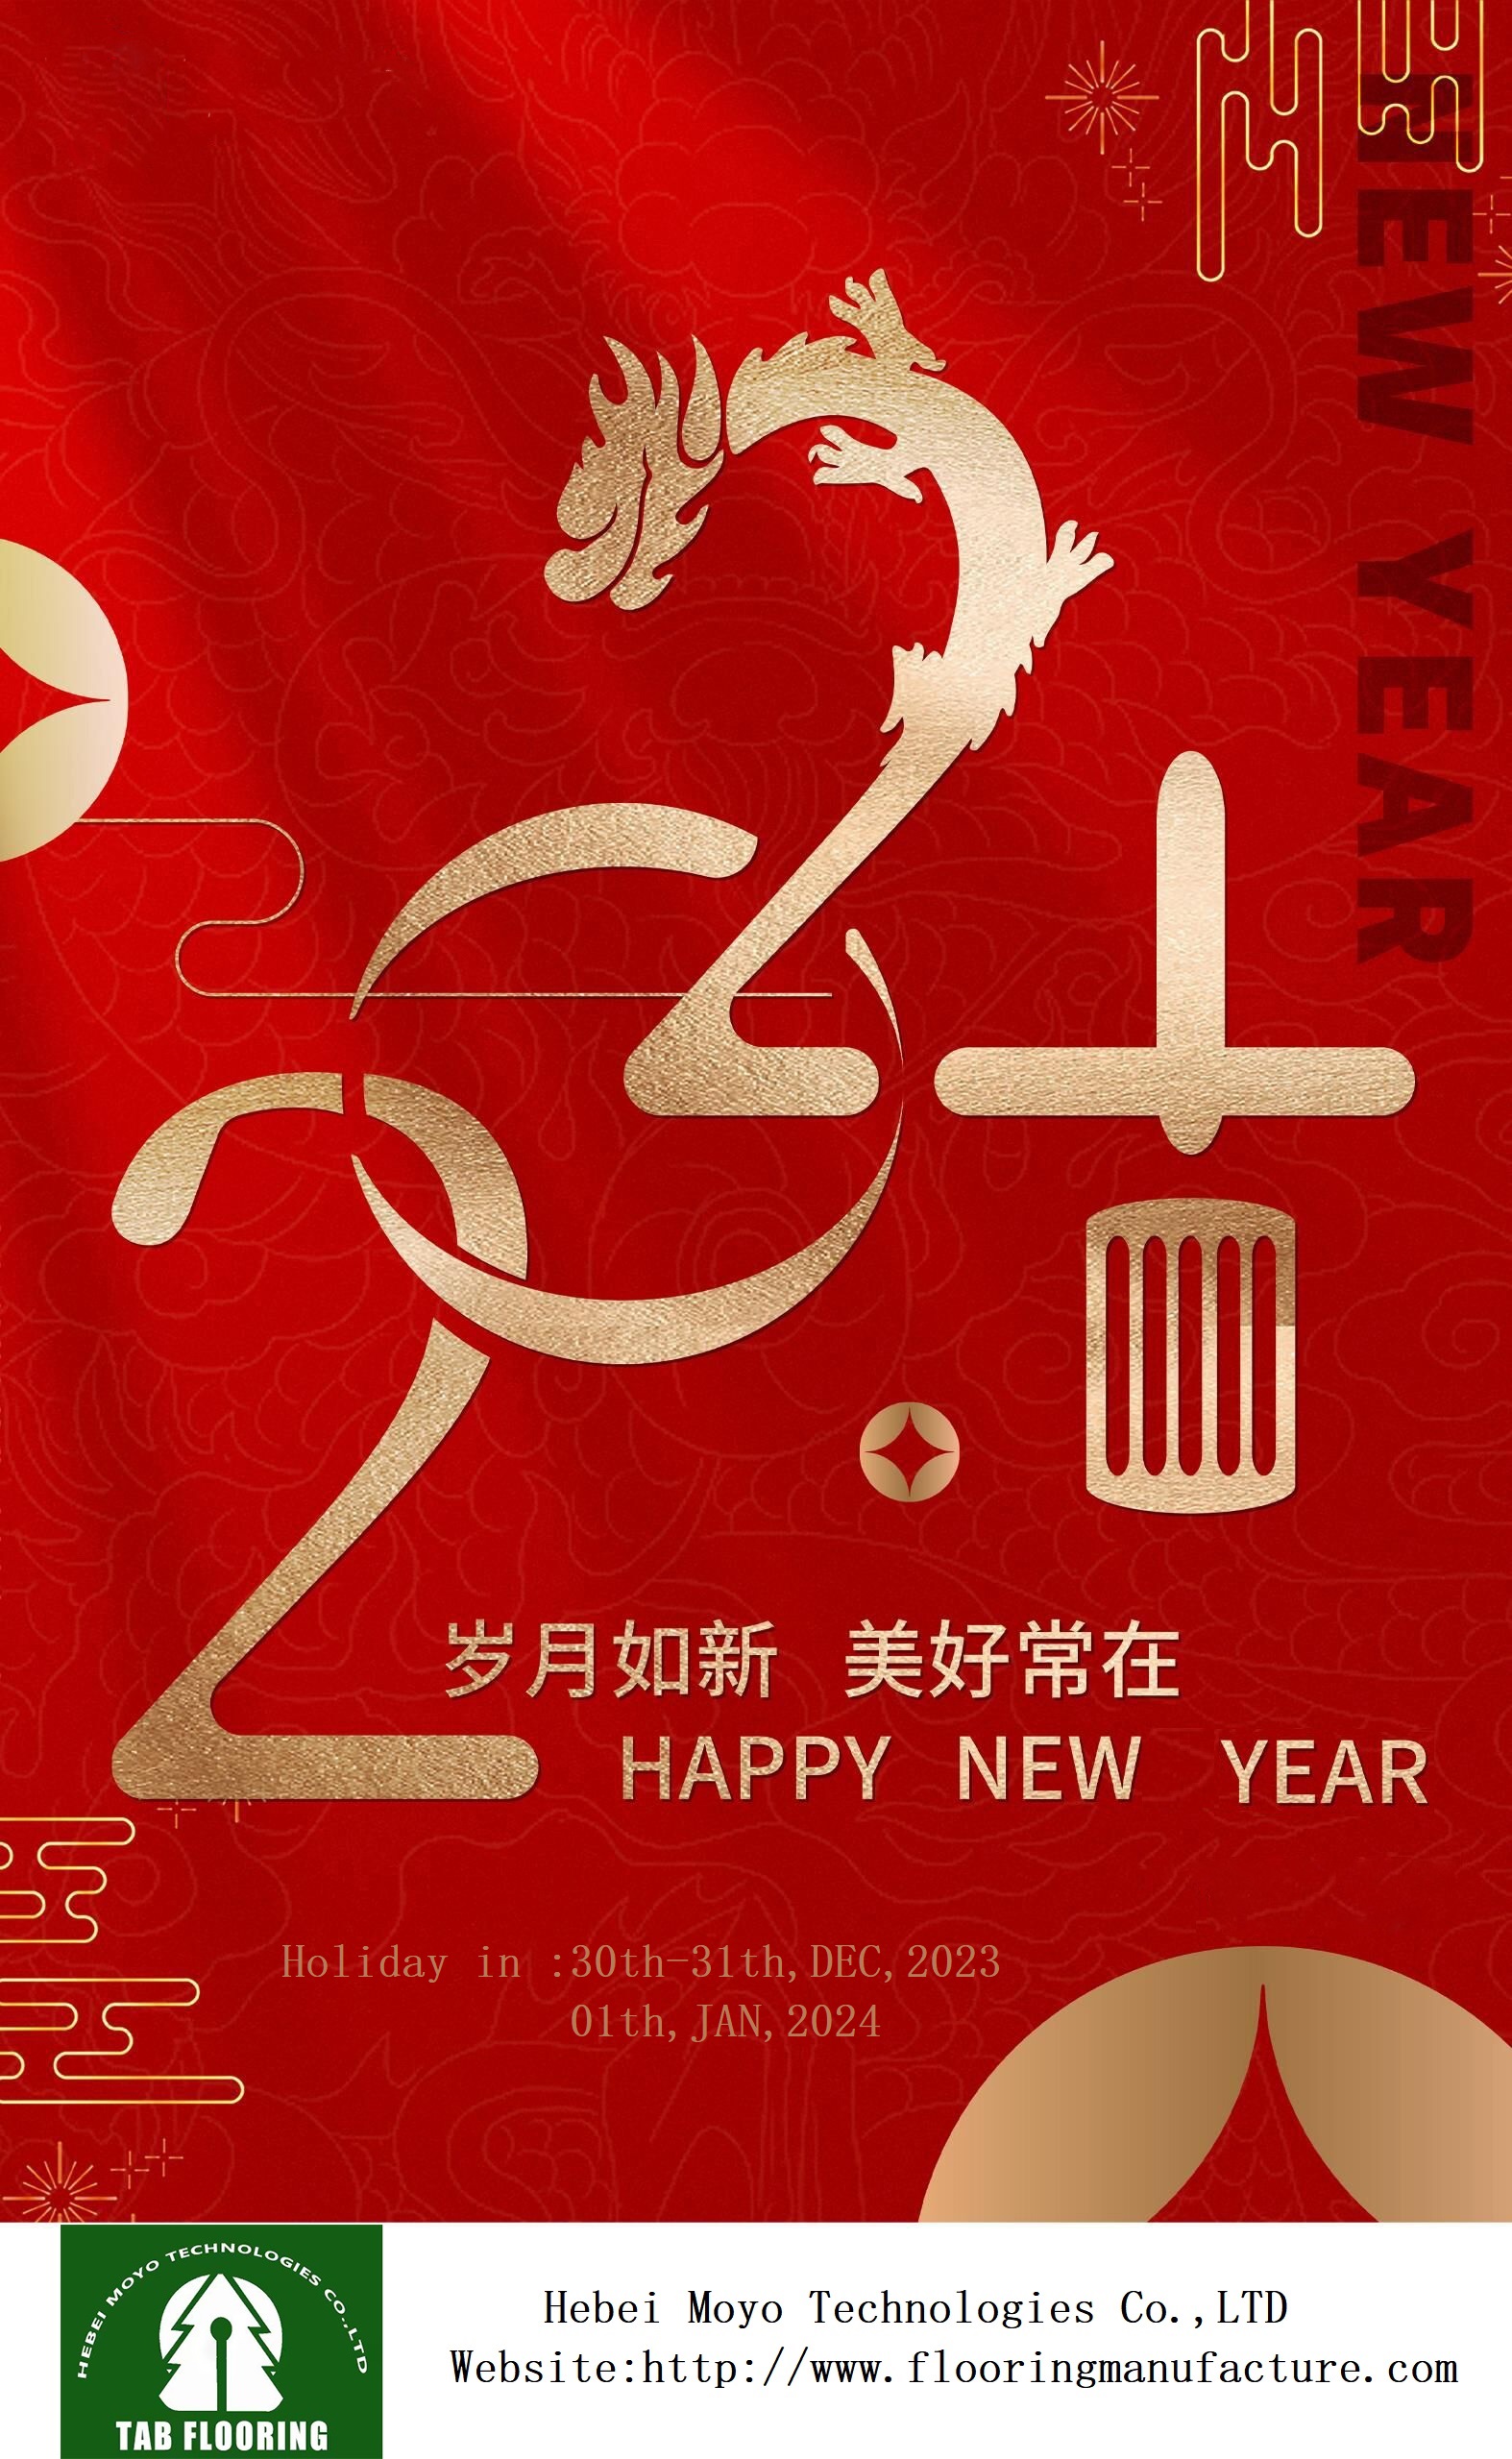 Happy new year for 2024 !